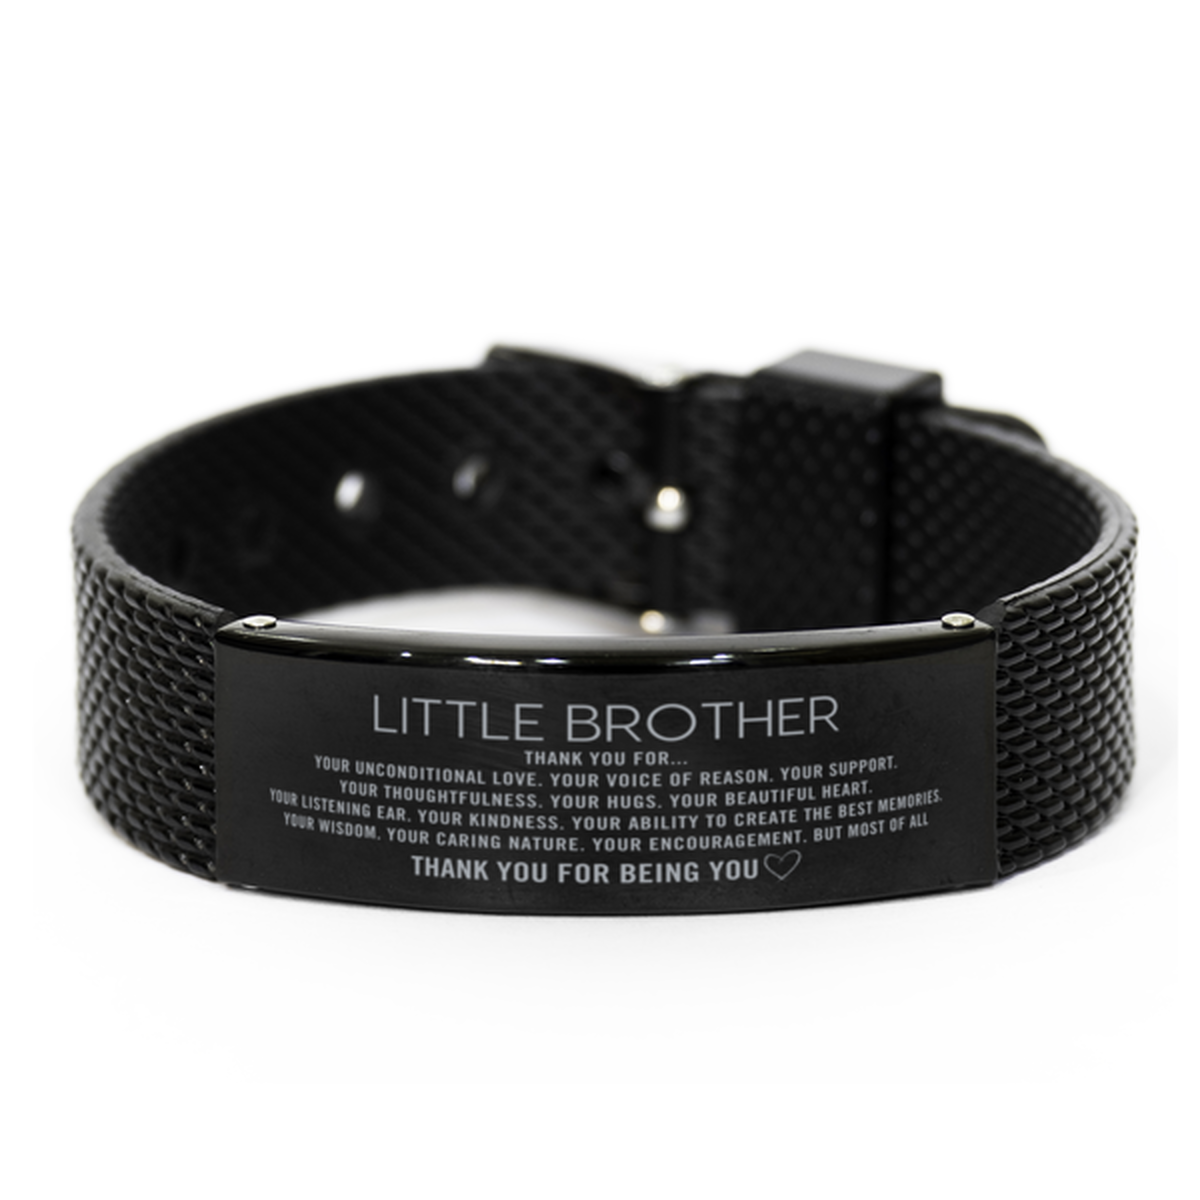 Little Brother Black Shark Mesh Bracelet Custom, Engraved Gifts For Little Brother Christmas Graduation Birthday Gifts for Men Women Little Brother Thank you for Your unconditional love